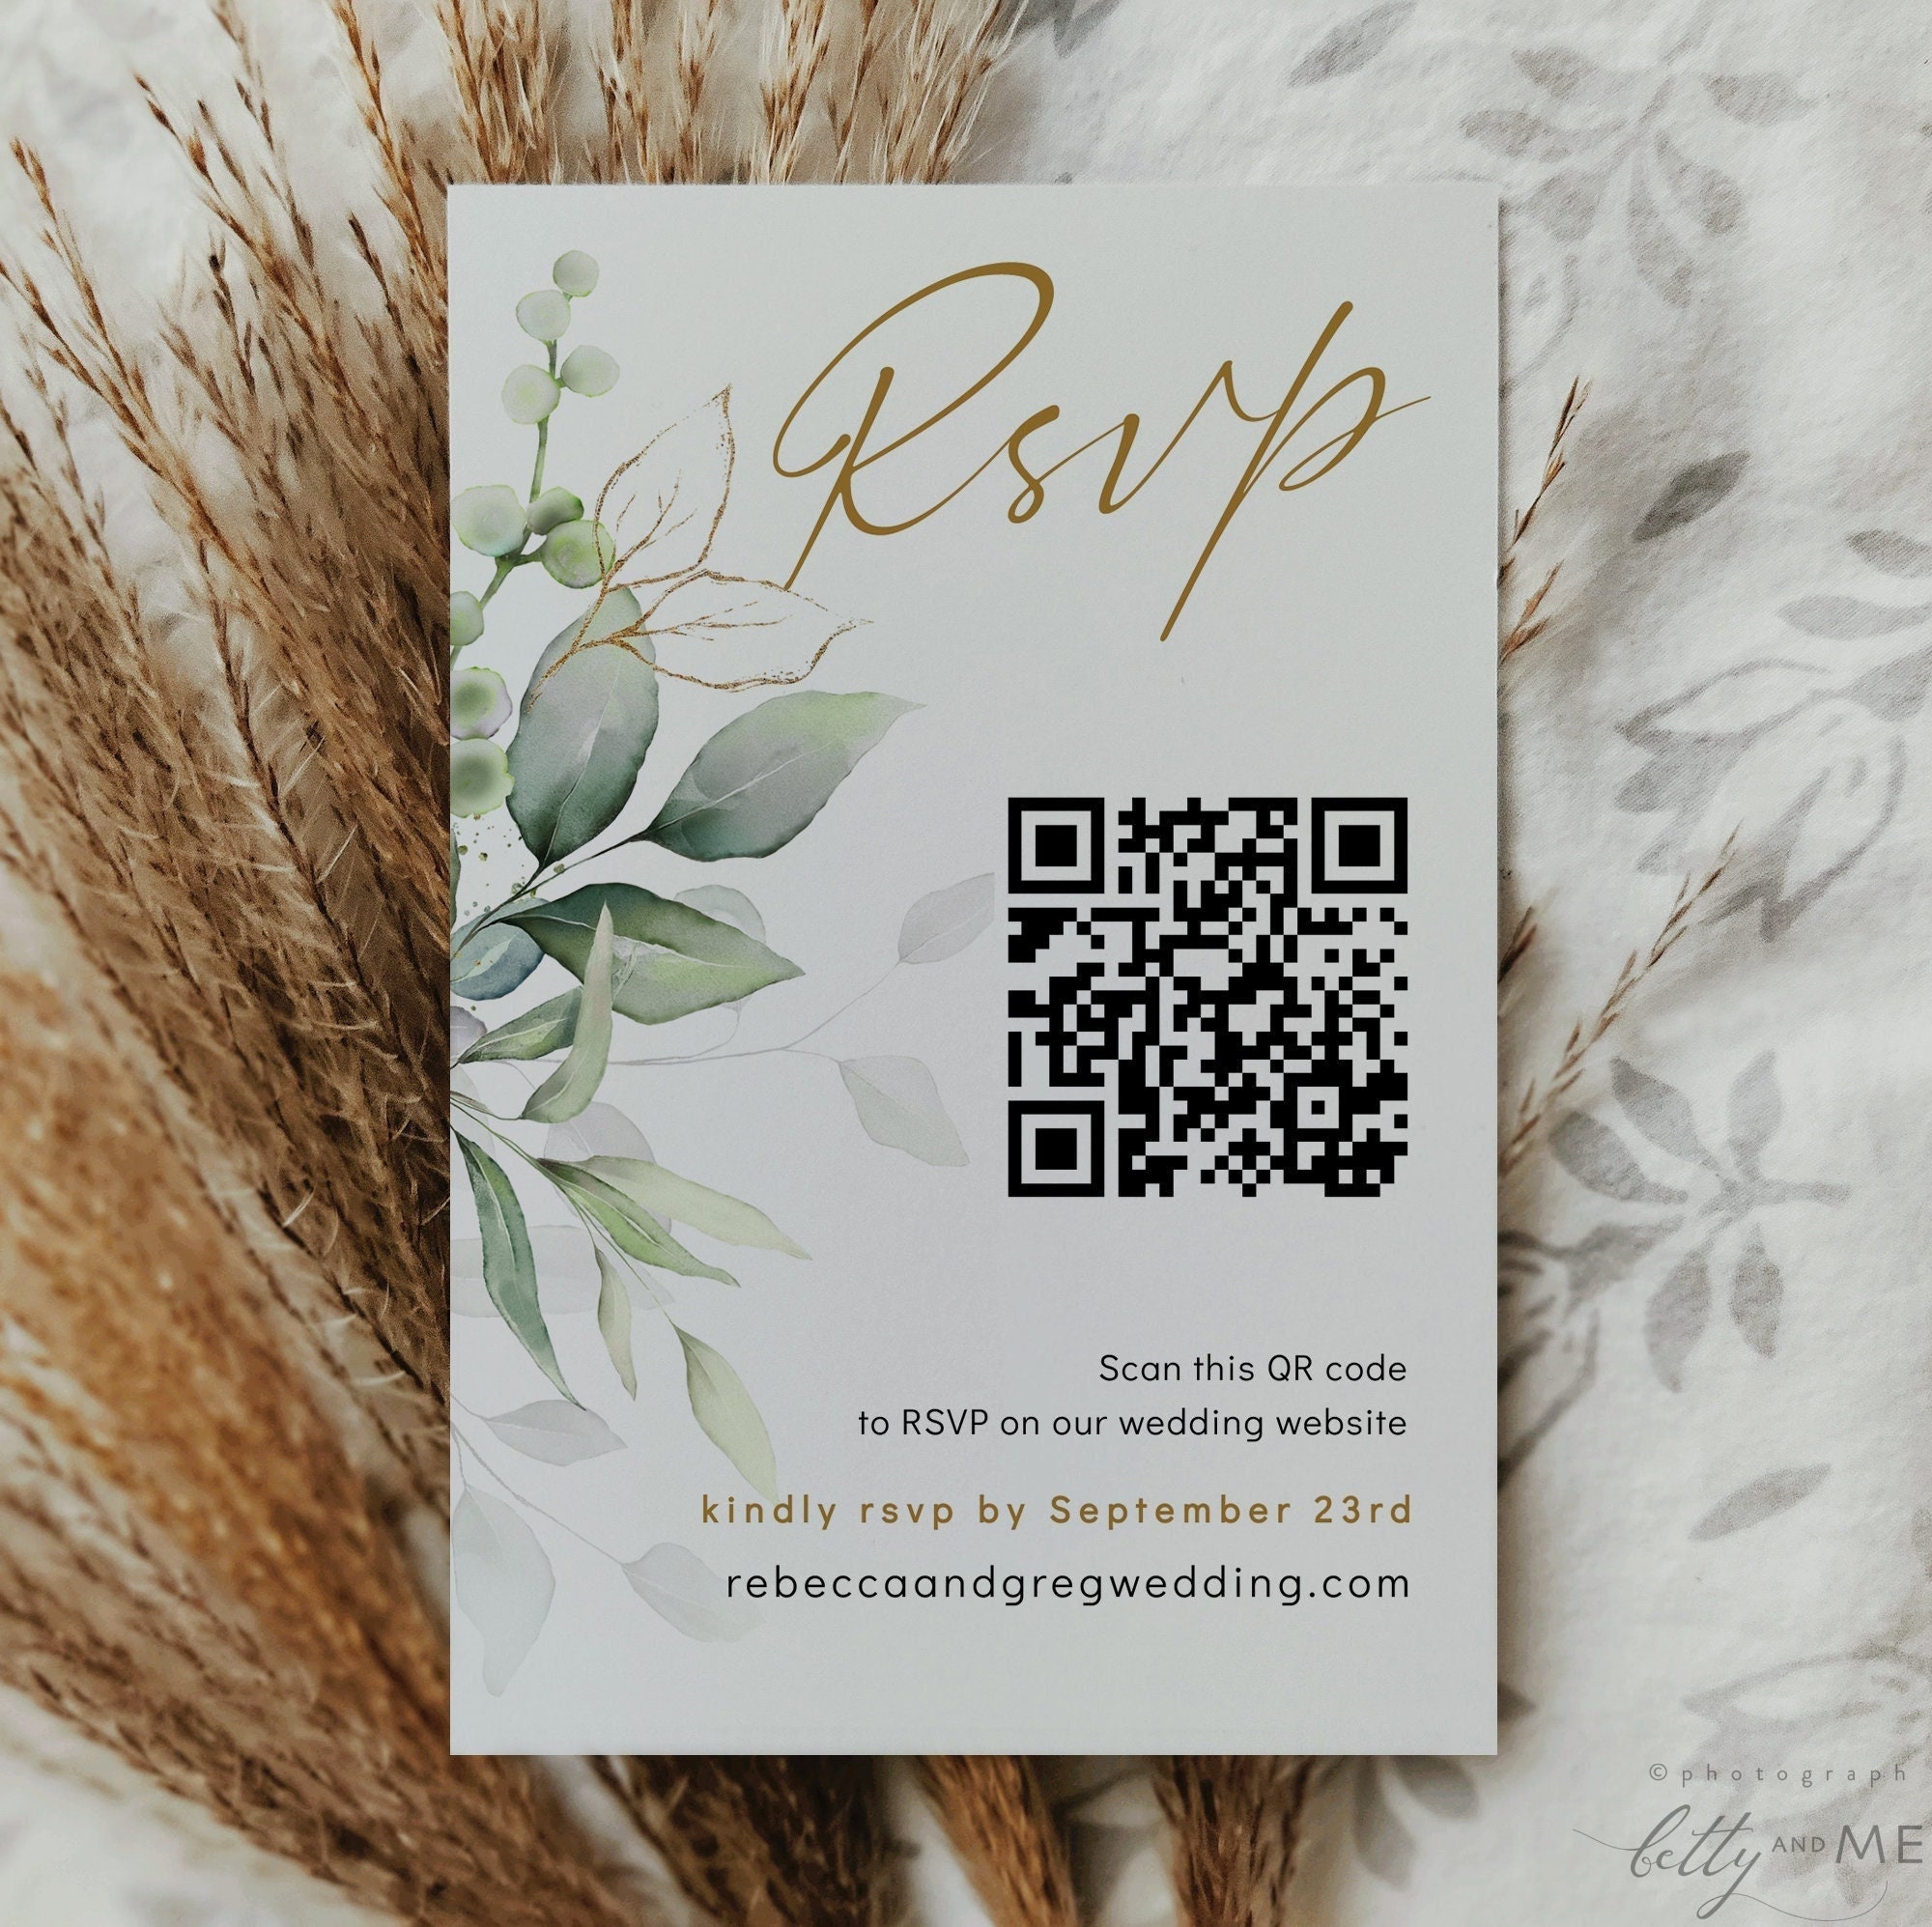 greenery-rsvp-card-with-qr-code-wedding-rsvp-qr-code-scan-to-rsvp-online-printable-cards-in-3